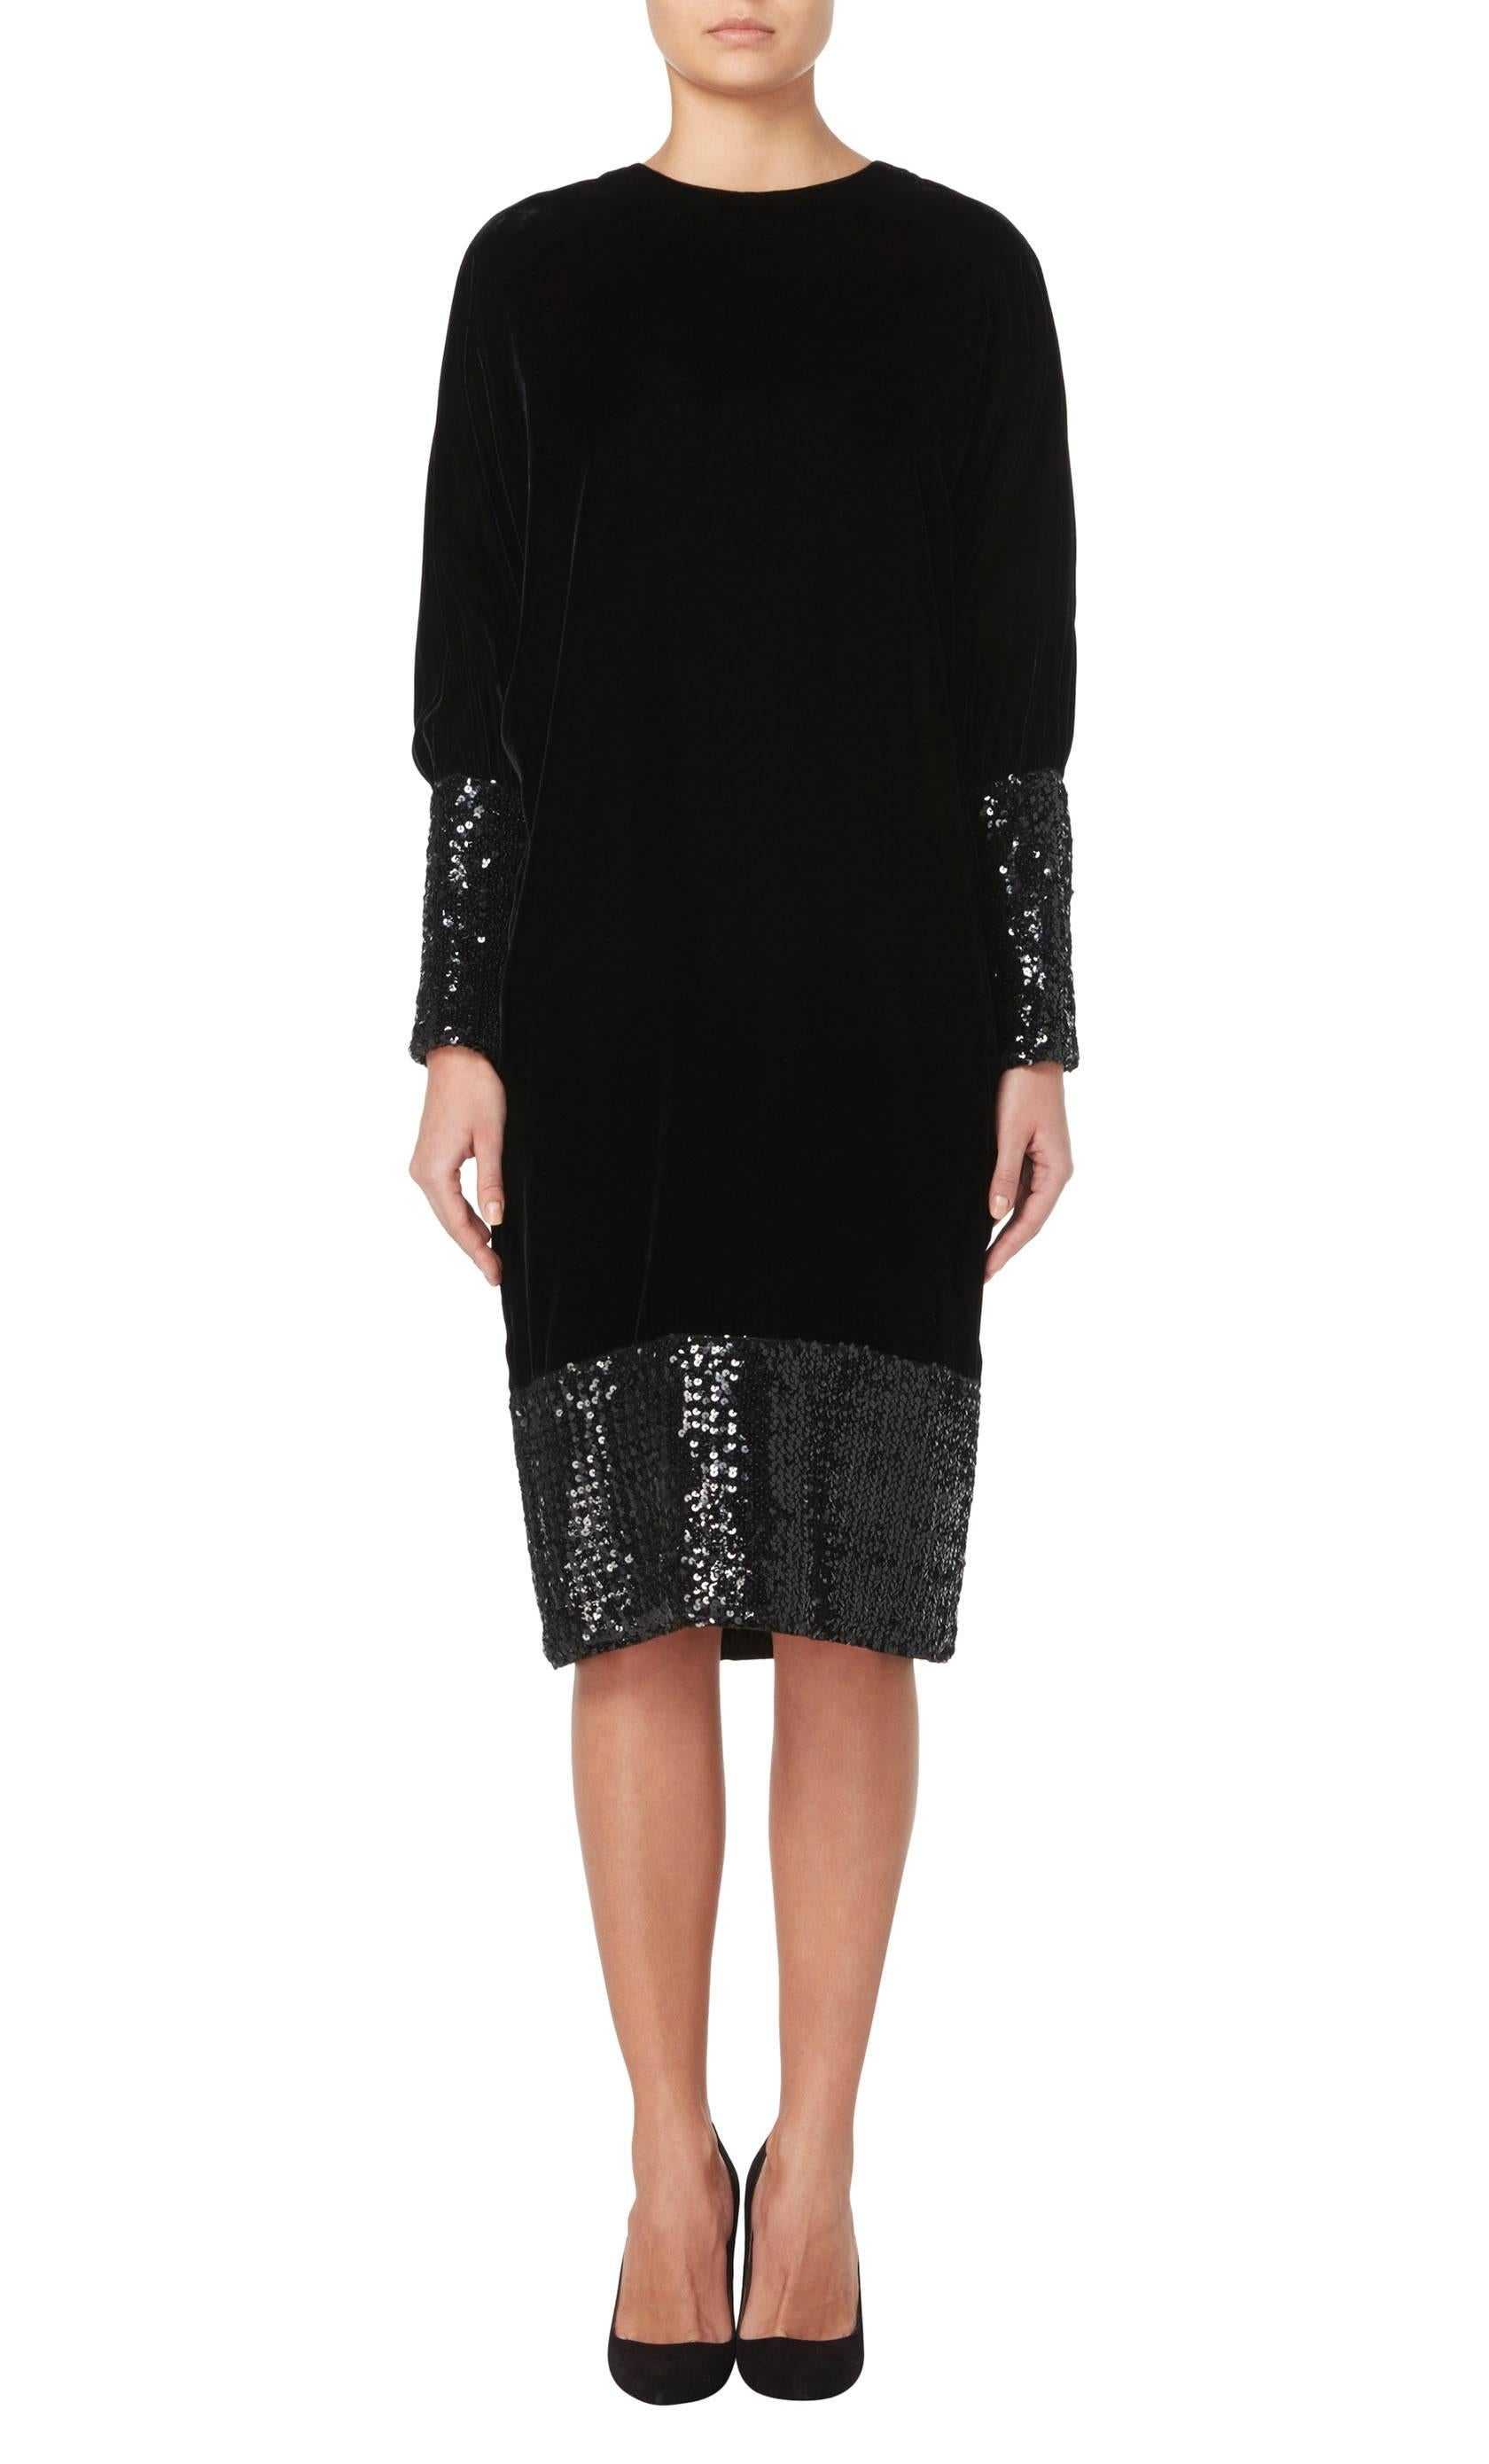 A luxurious and thoroughly modern dress by the master of modernism, this is an LBD with attitude. Constructed in plush black velvet and edged with thousands of gunmetal sequins at both hem and cuffs, the dress is cut in a slouchy sweater style, with